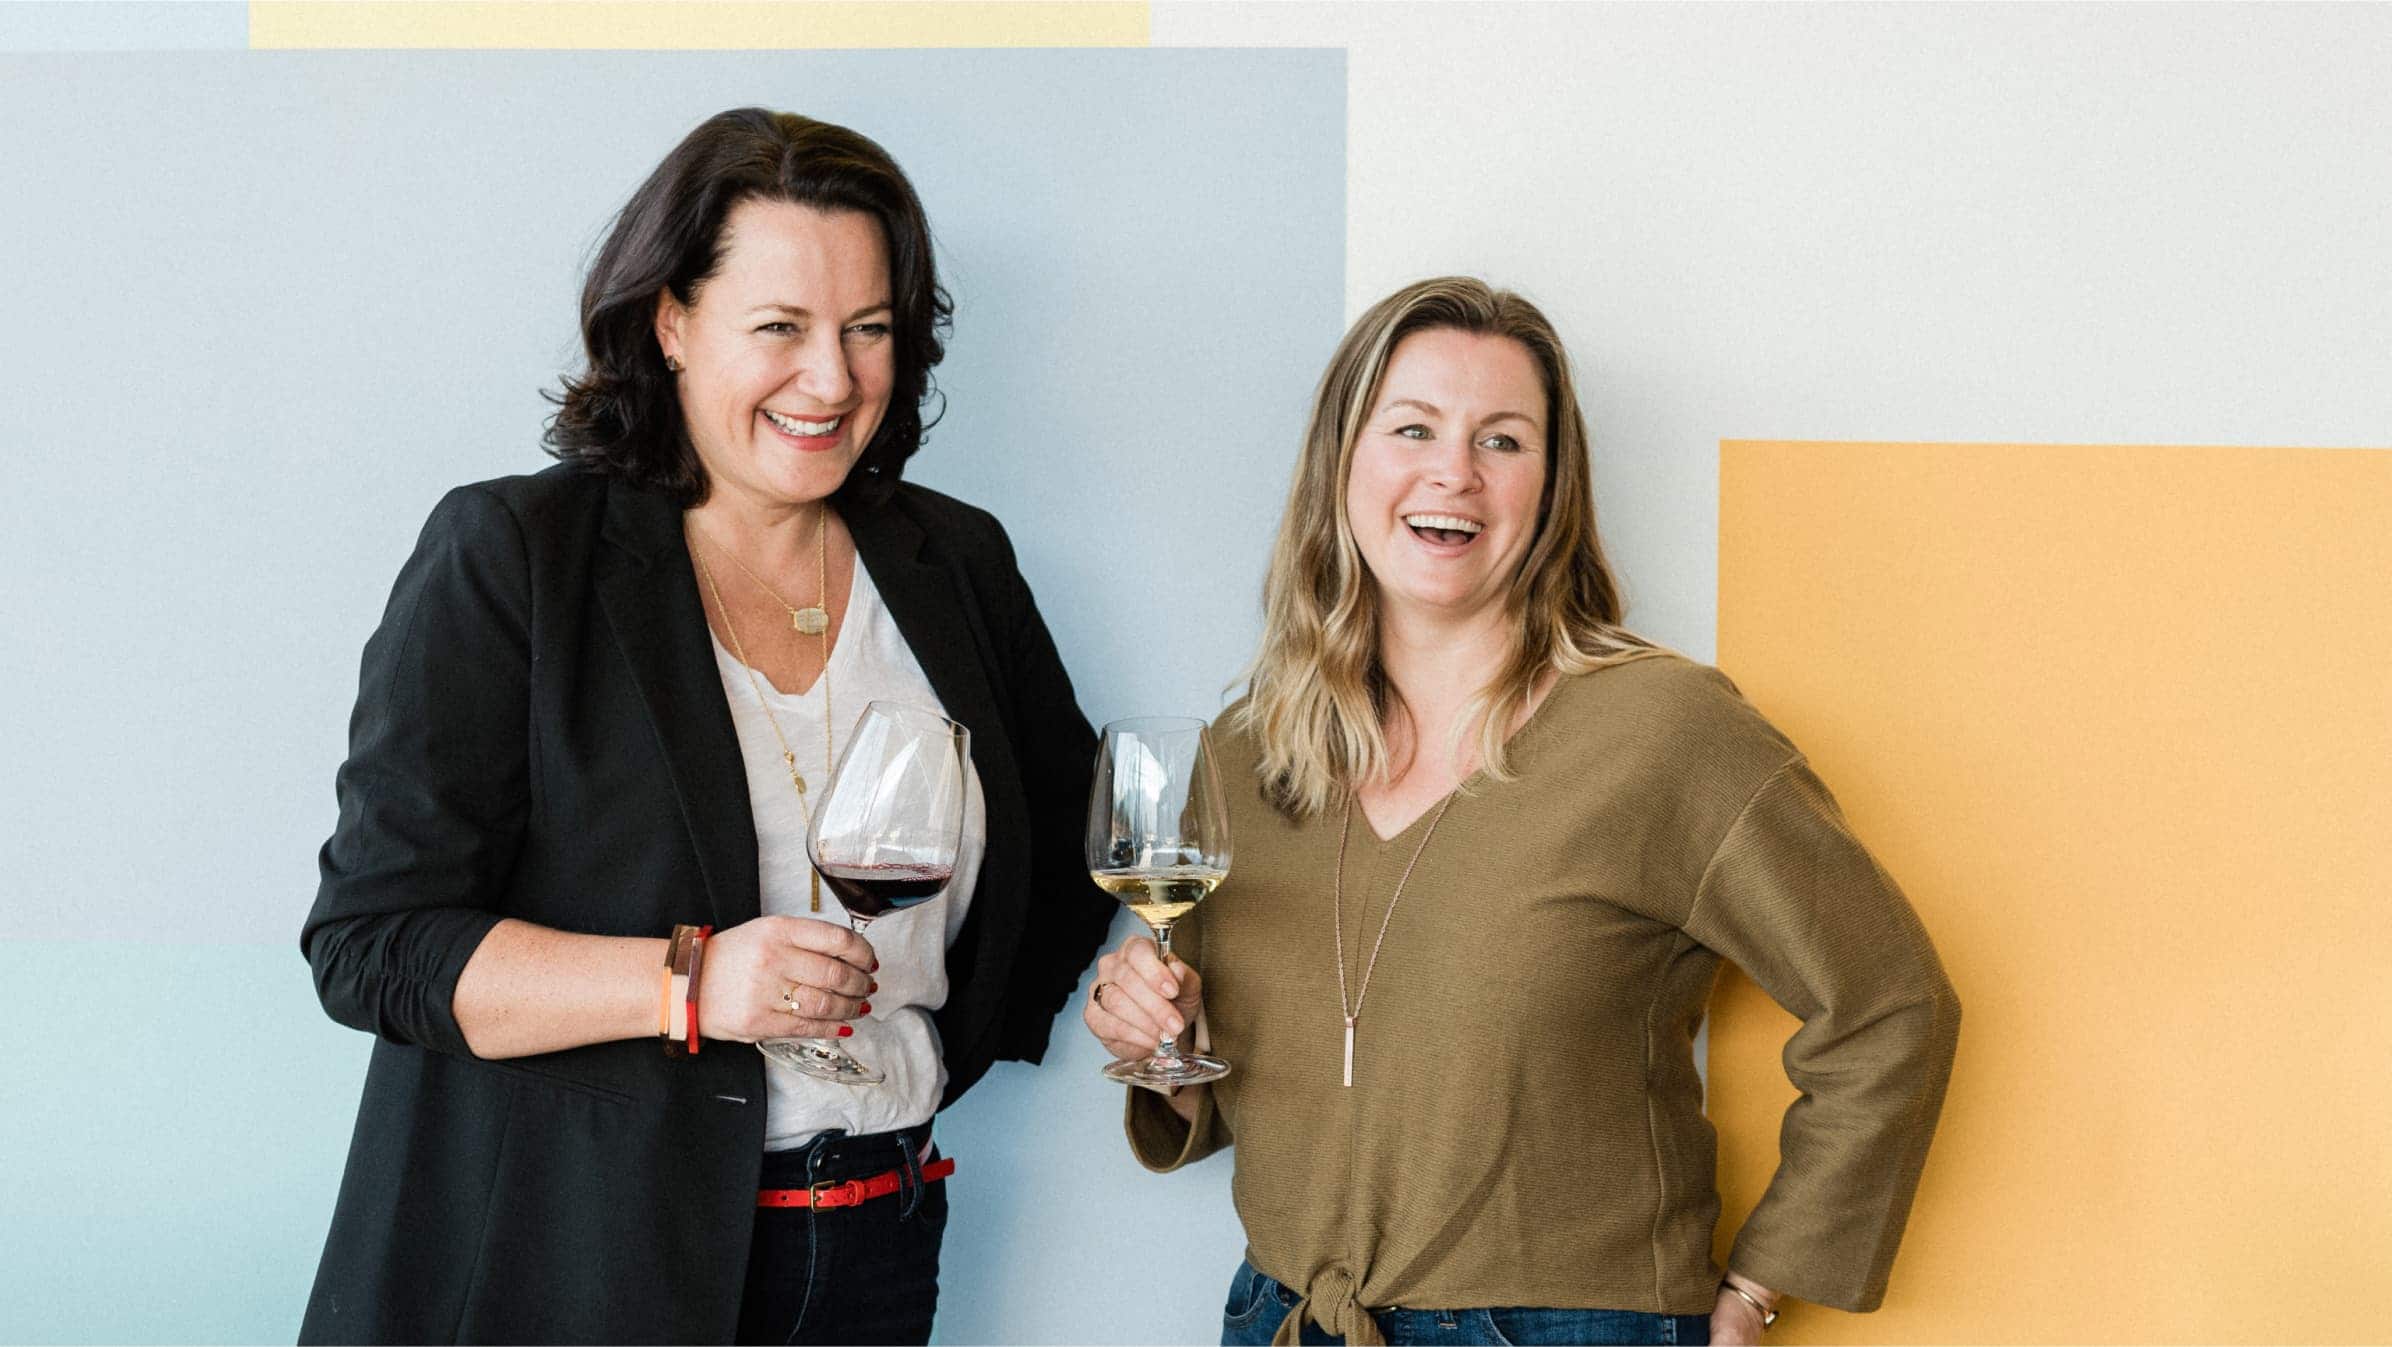 Nicole Hughes and Anne Siegel, owners of Olive and Poppy, laughing over a glass of wine.